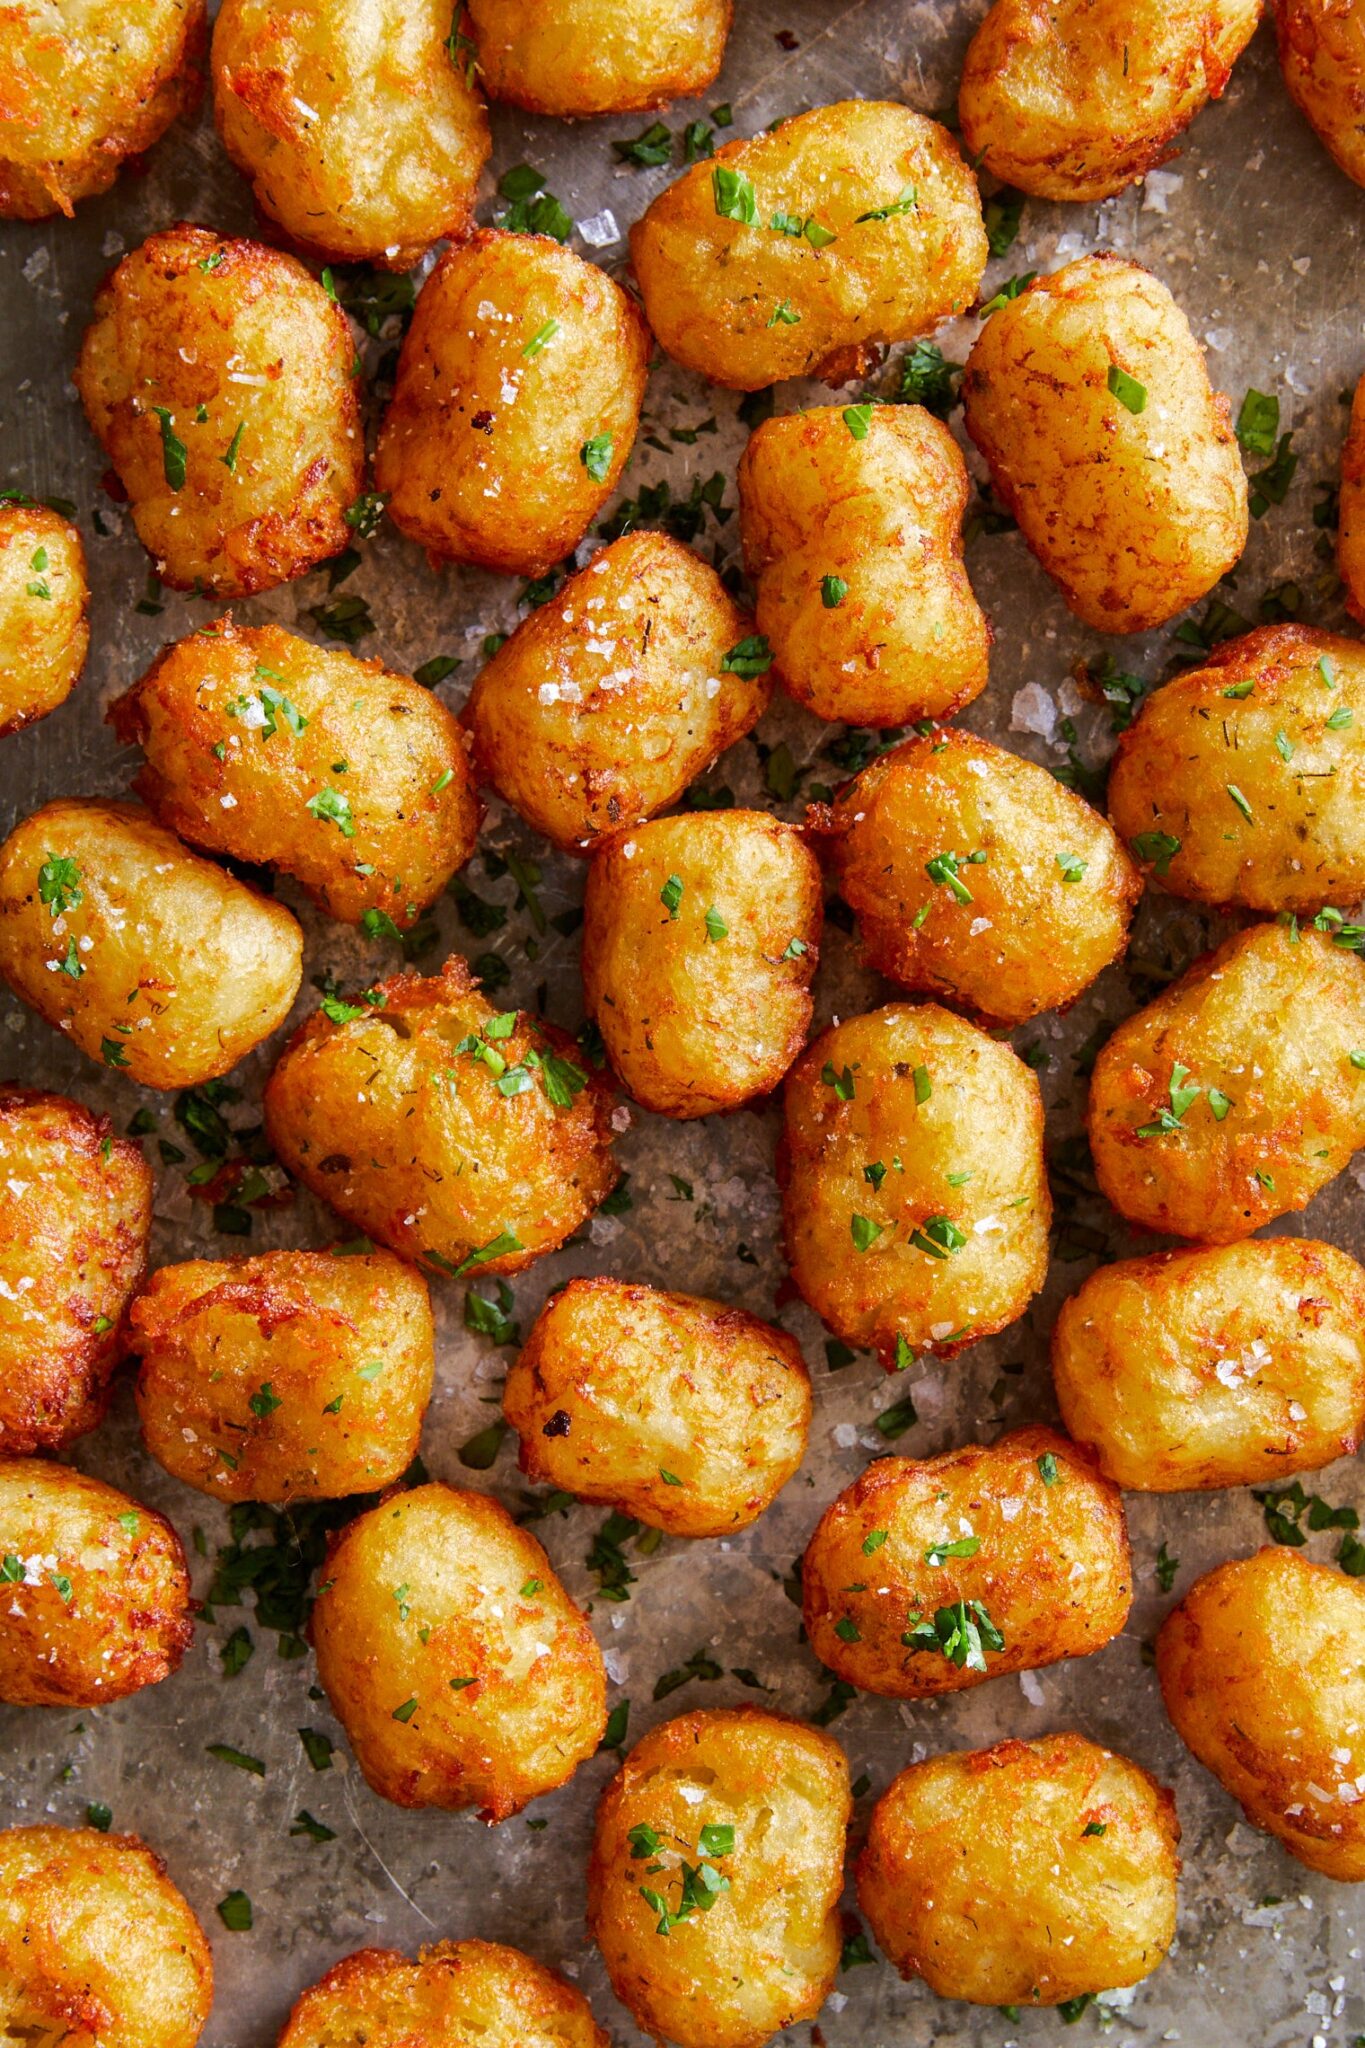 Fried tater tots on a baking sheet.